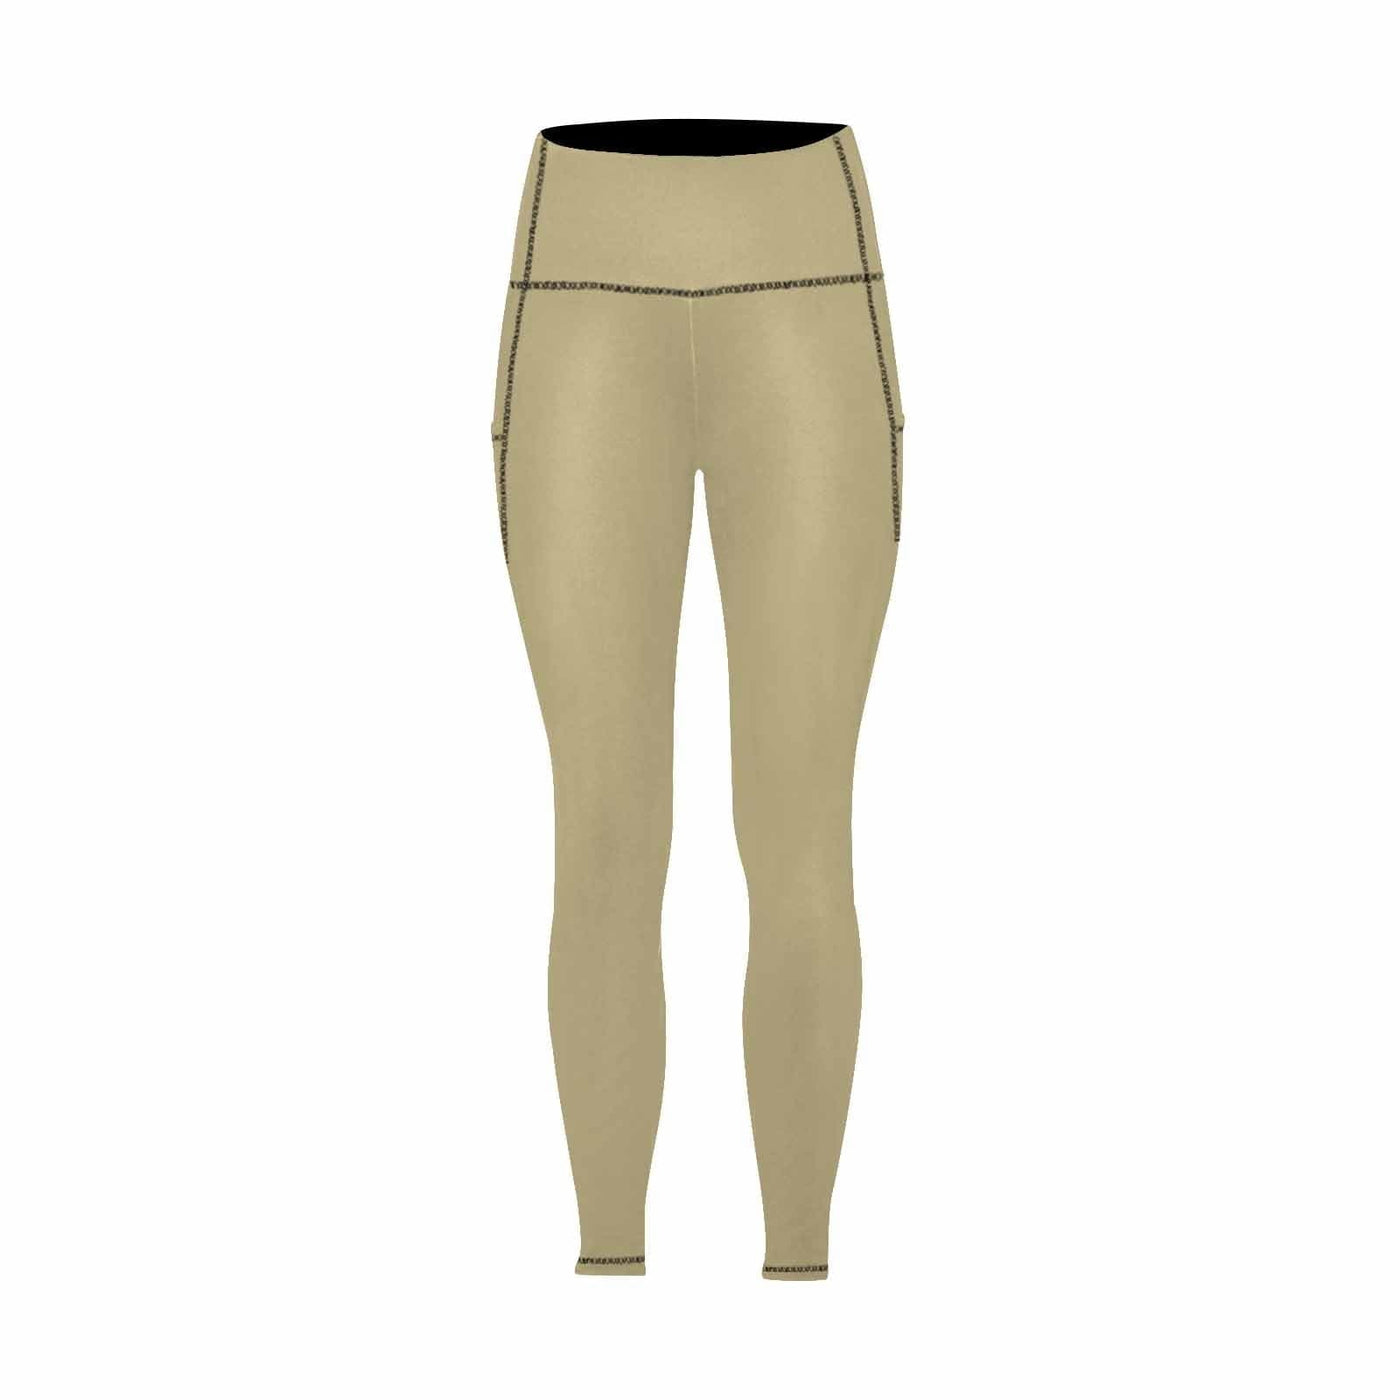 Womens Leggings With Pockets - Fitness Pants / Sand Dollar Brown - Womens